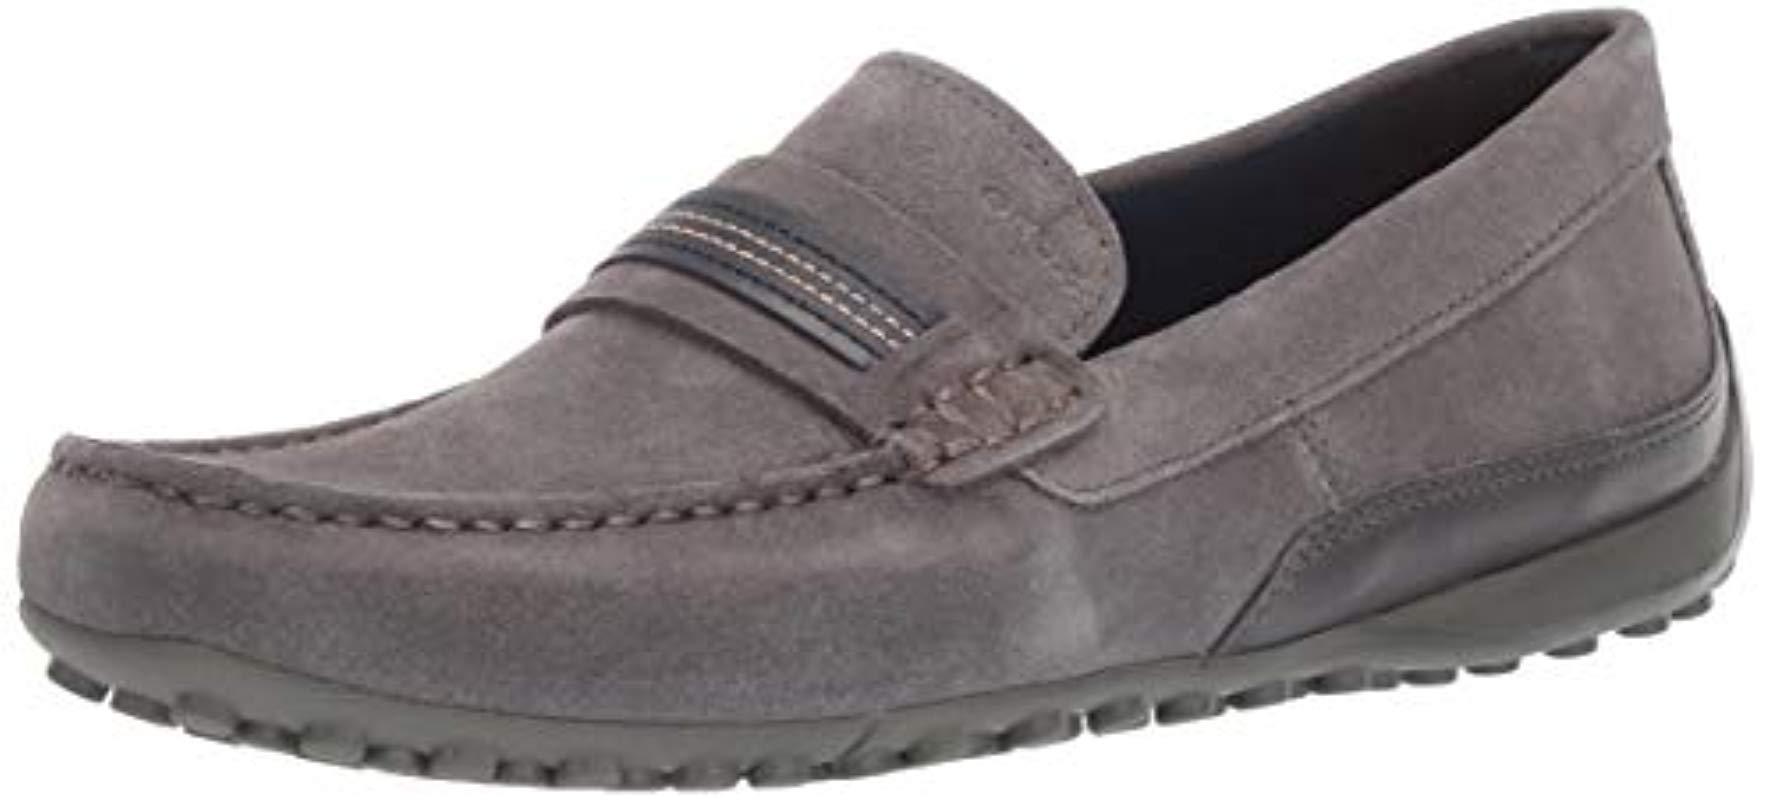 Geox Snake 22 Suede Driving Moc Loafer Style in Gray for Men - Save 36% ...